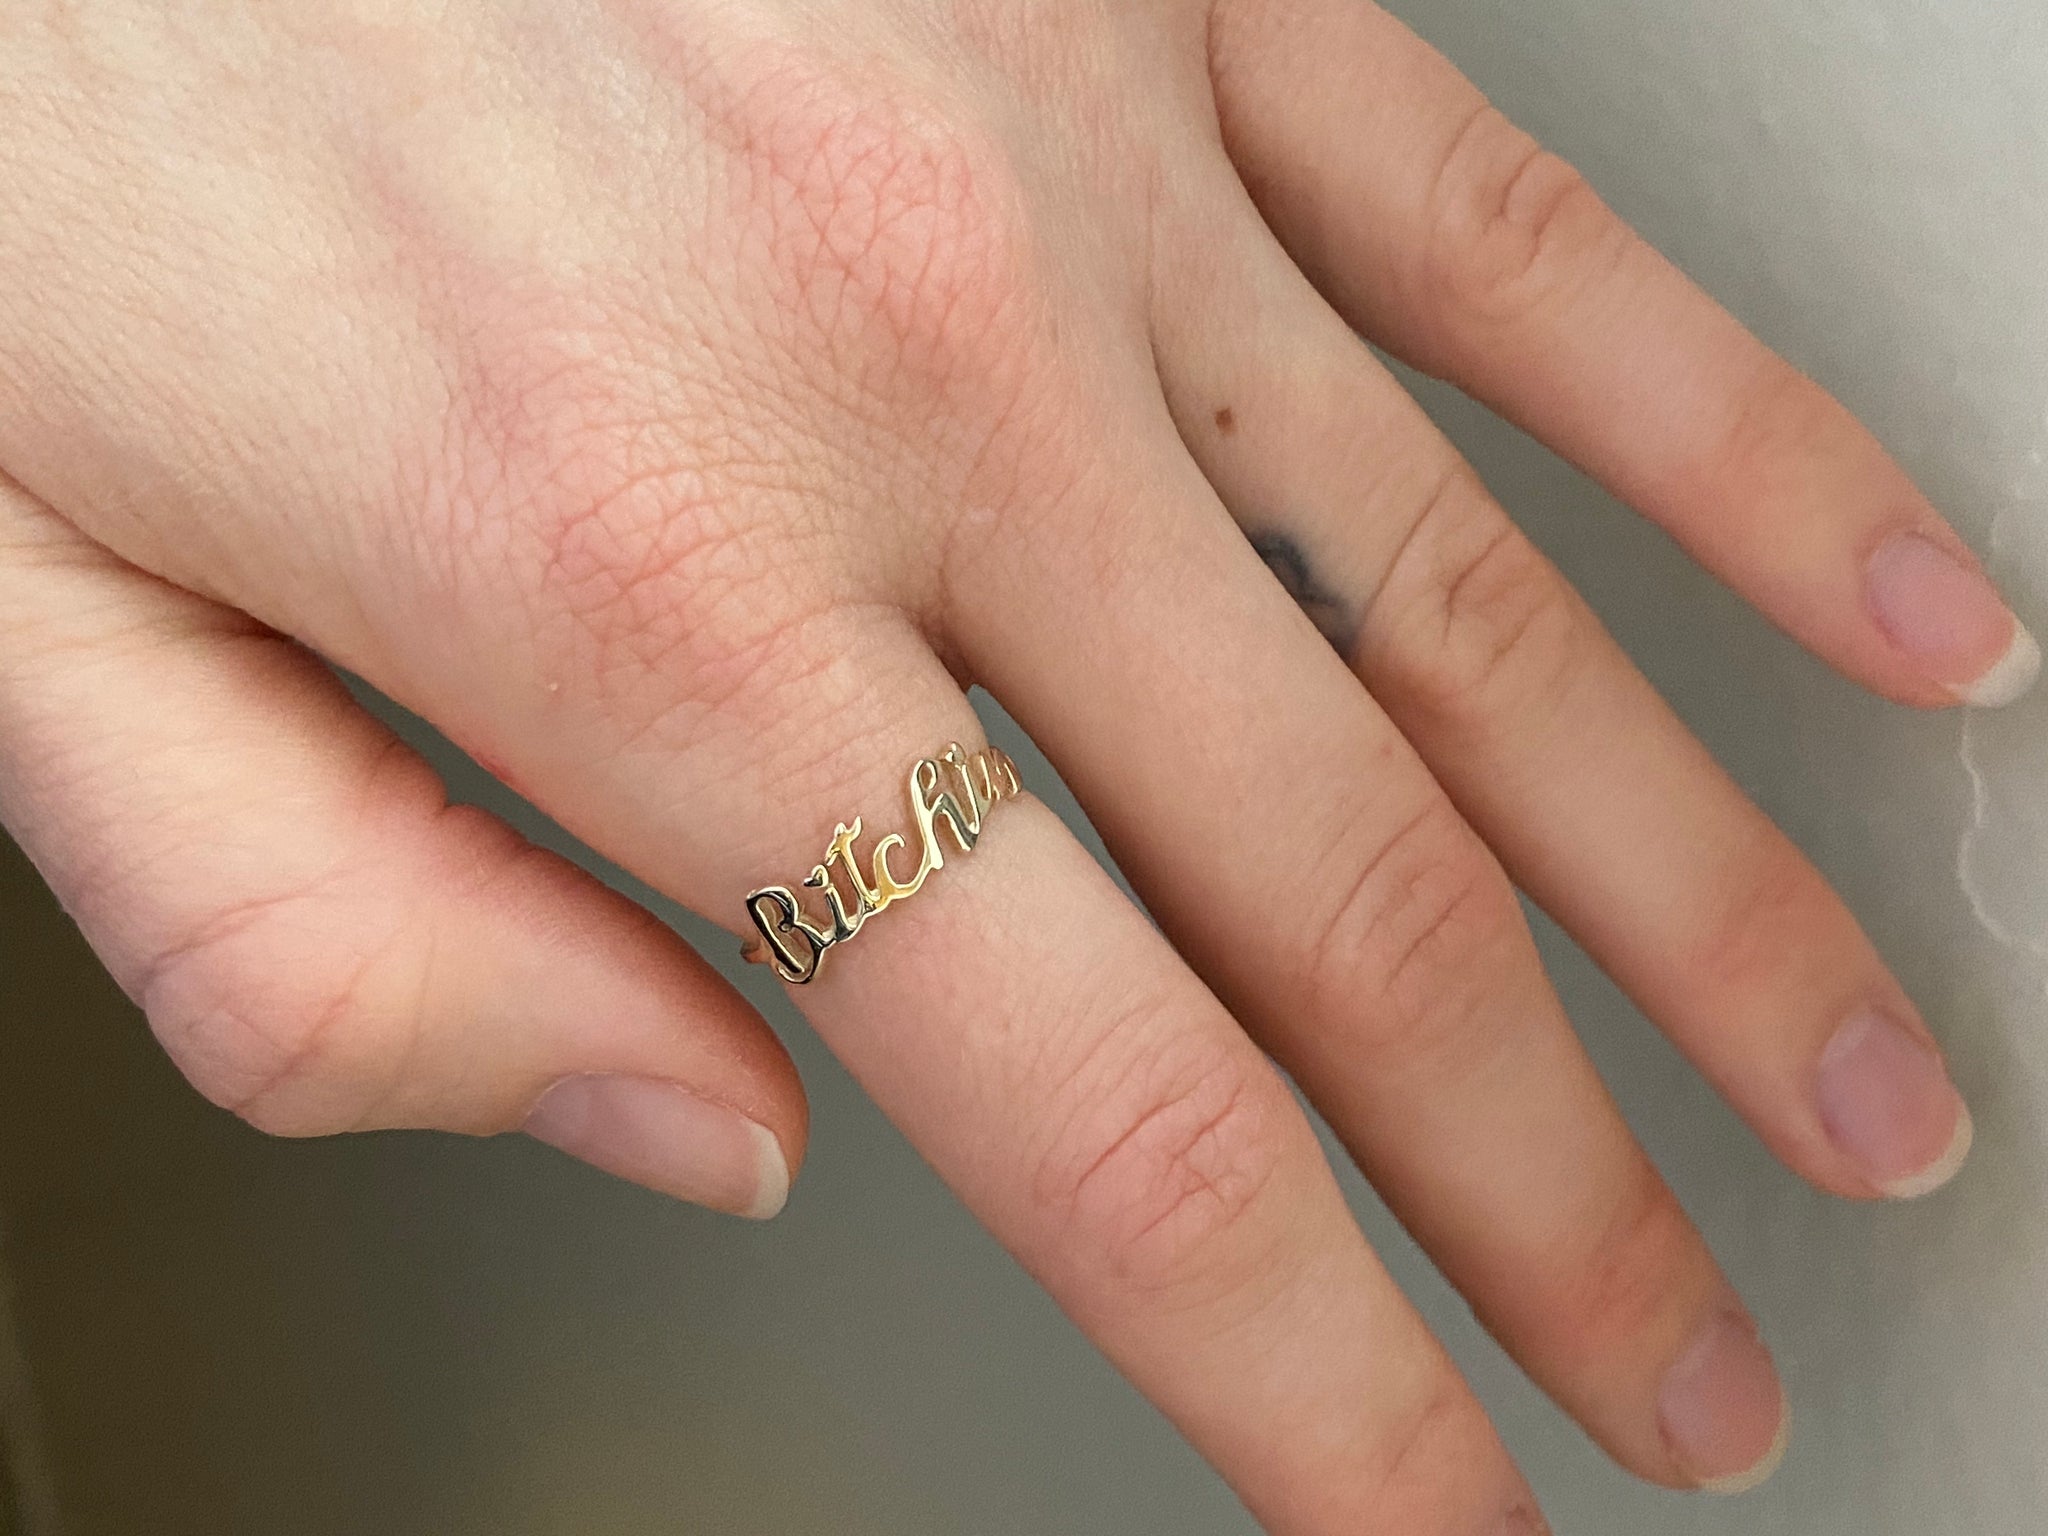 Bitchin - solid gold script ring